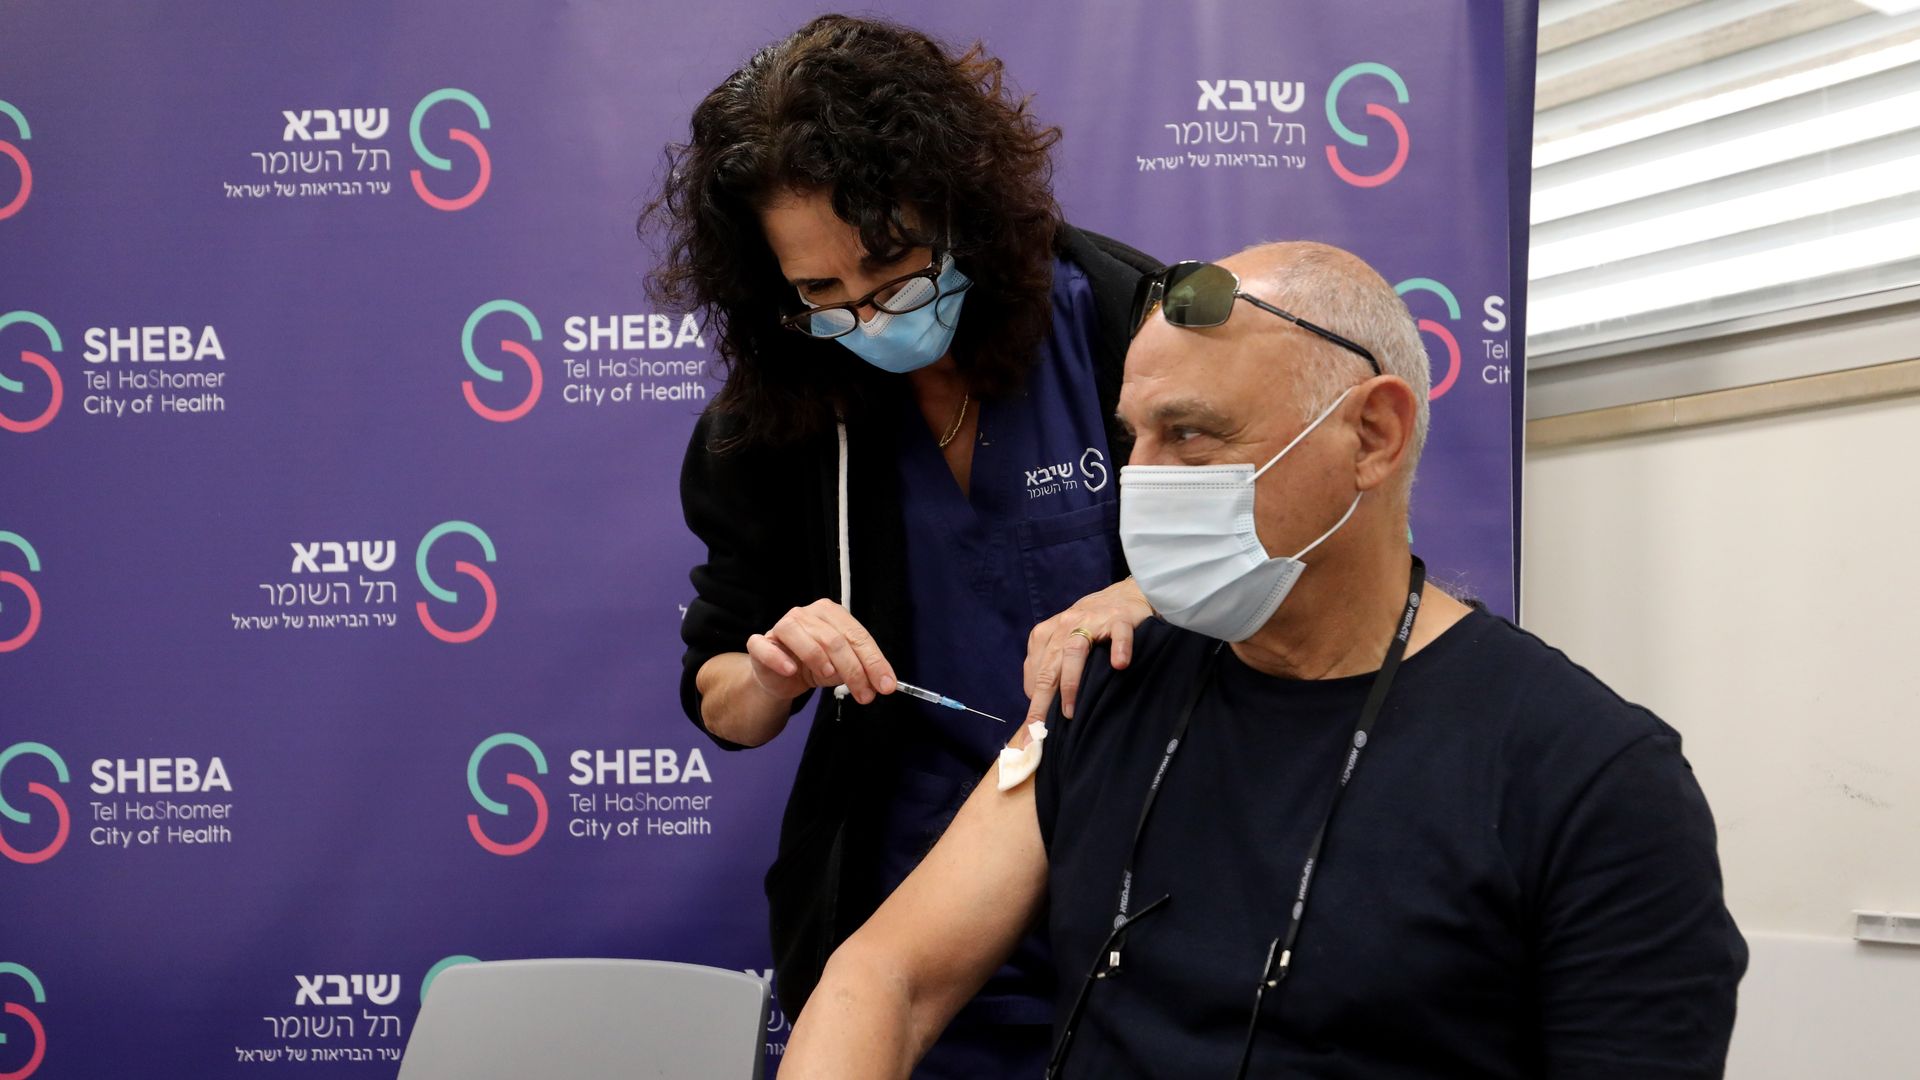 An Israeli man receives the fourth dose of COVID-19 vaccine at Sheba Medical Center